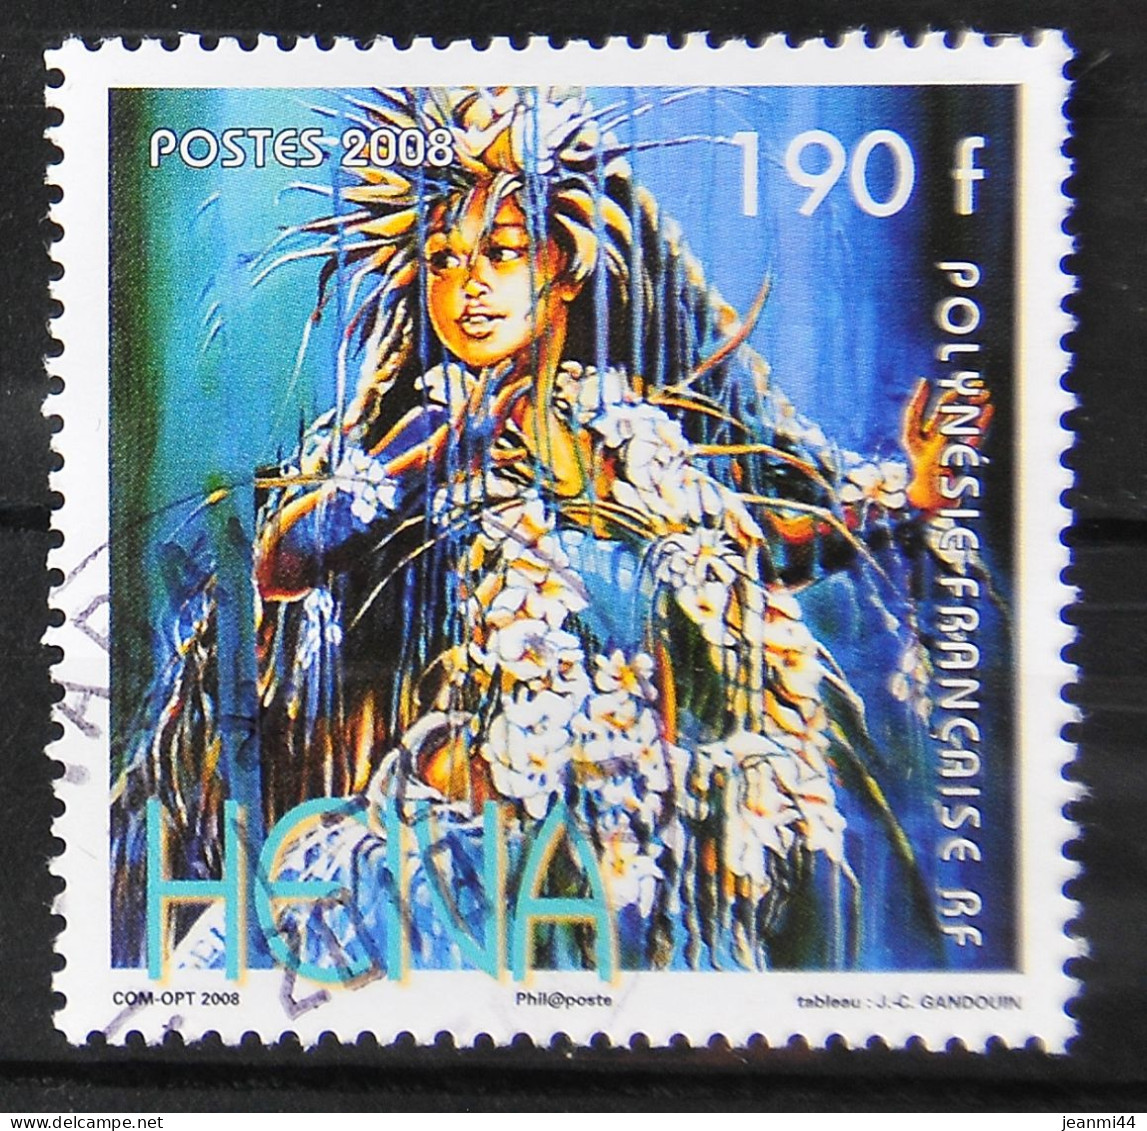 POLYNESIE FRANCAISE - 2008 - N° 839 HIEVA - Cachet à Date - Used Stamps